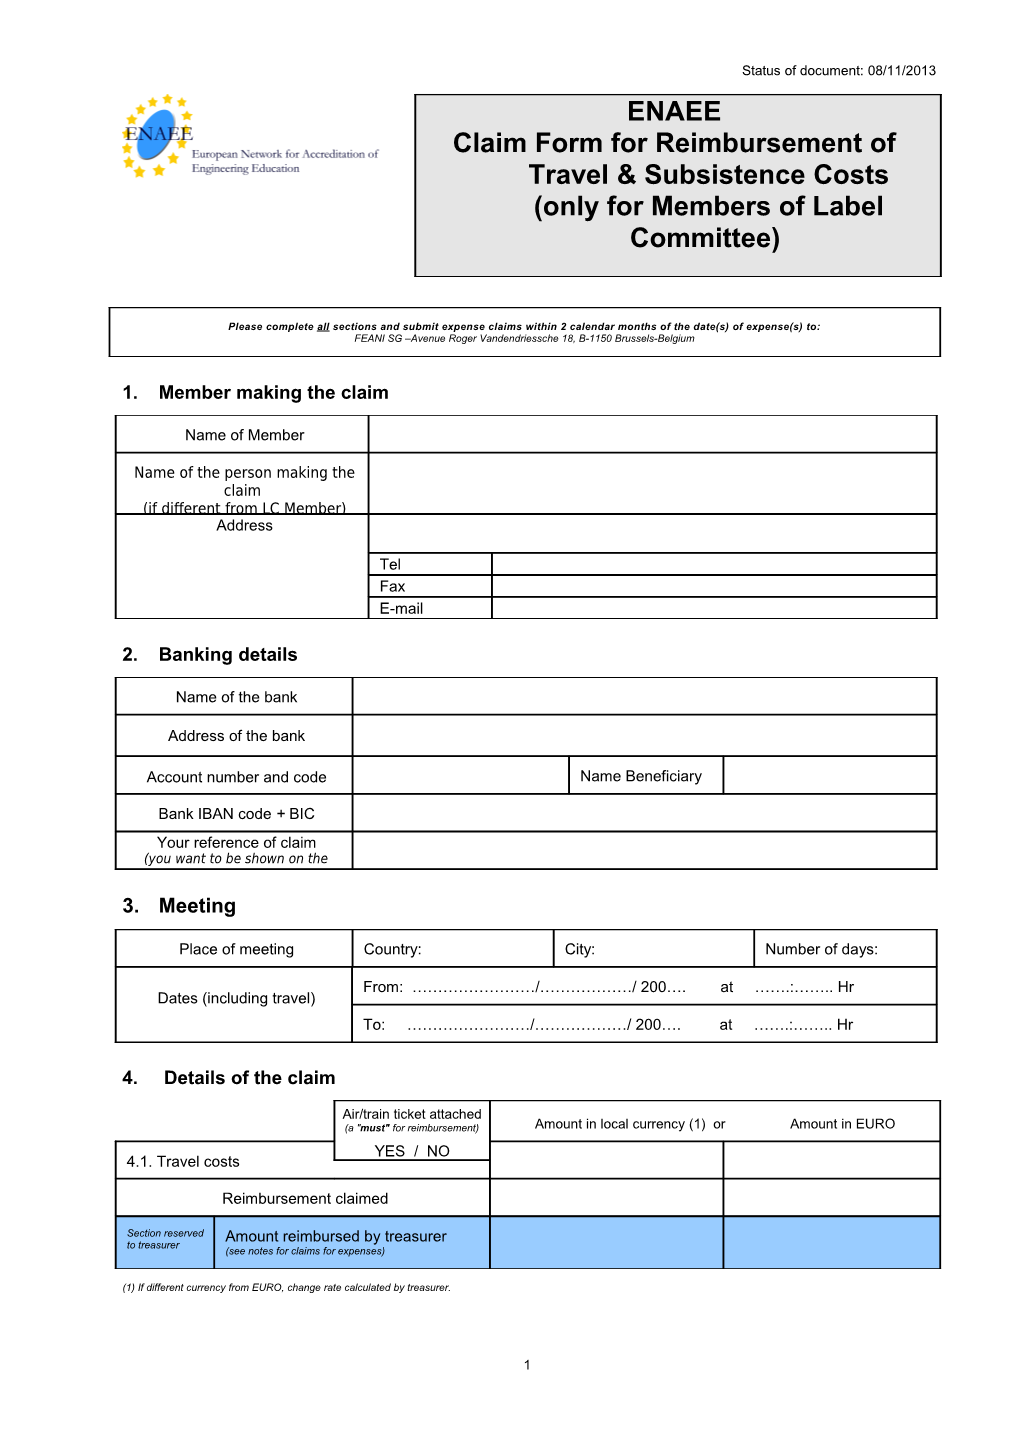 Claim Form for Reimbursement of Travel & Subsistence Costs(Only for Members of Label Committee)